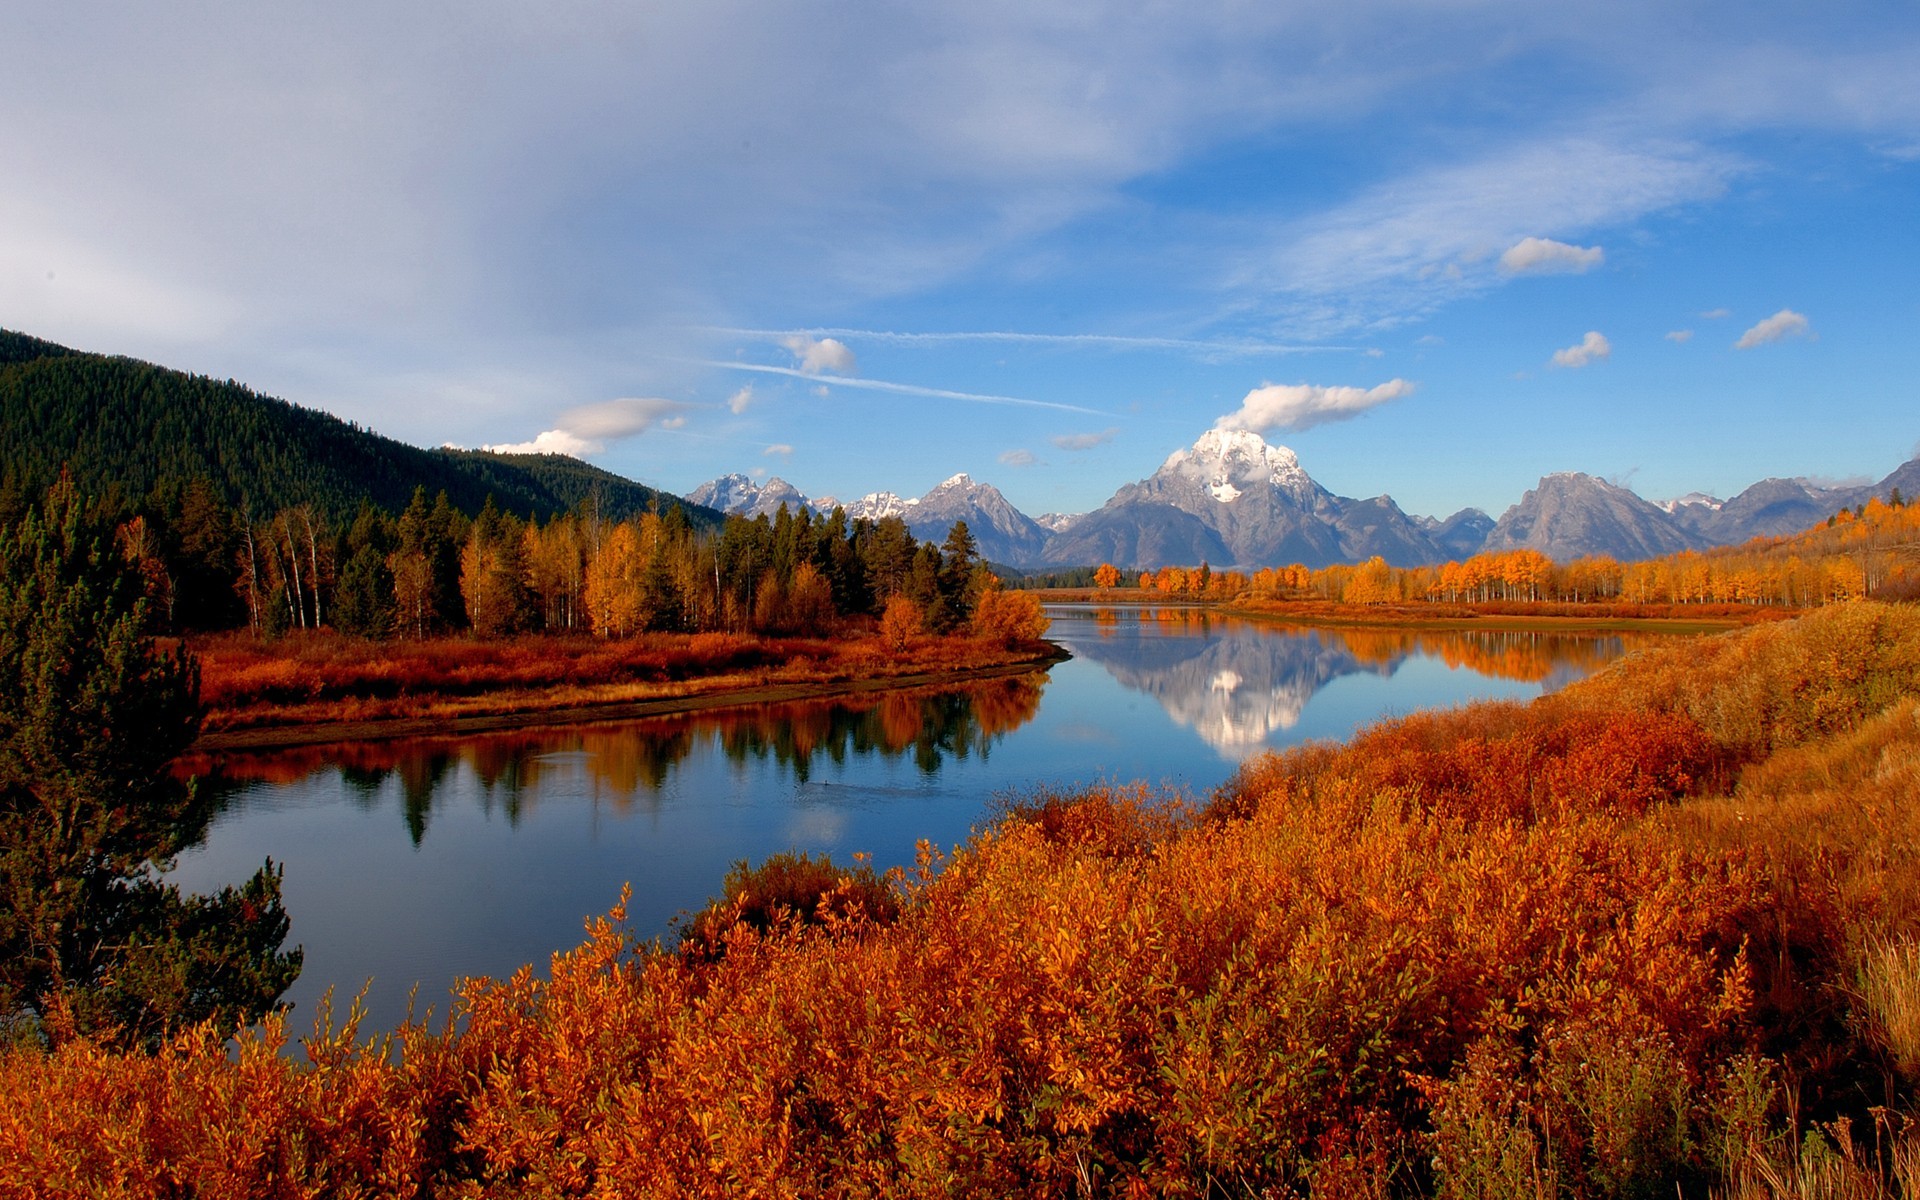 General 1920x1200 river nature mountains landscape snowy peak fall trees plants snowy mountain red leaves